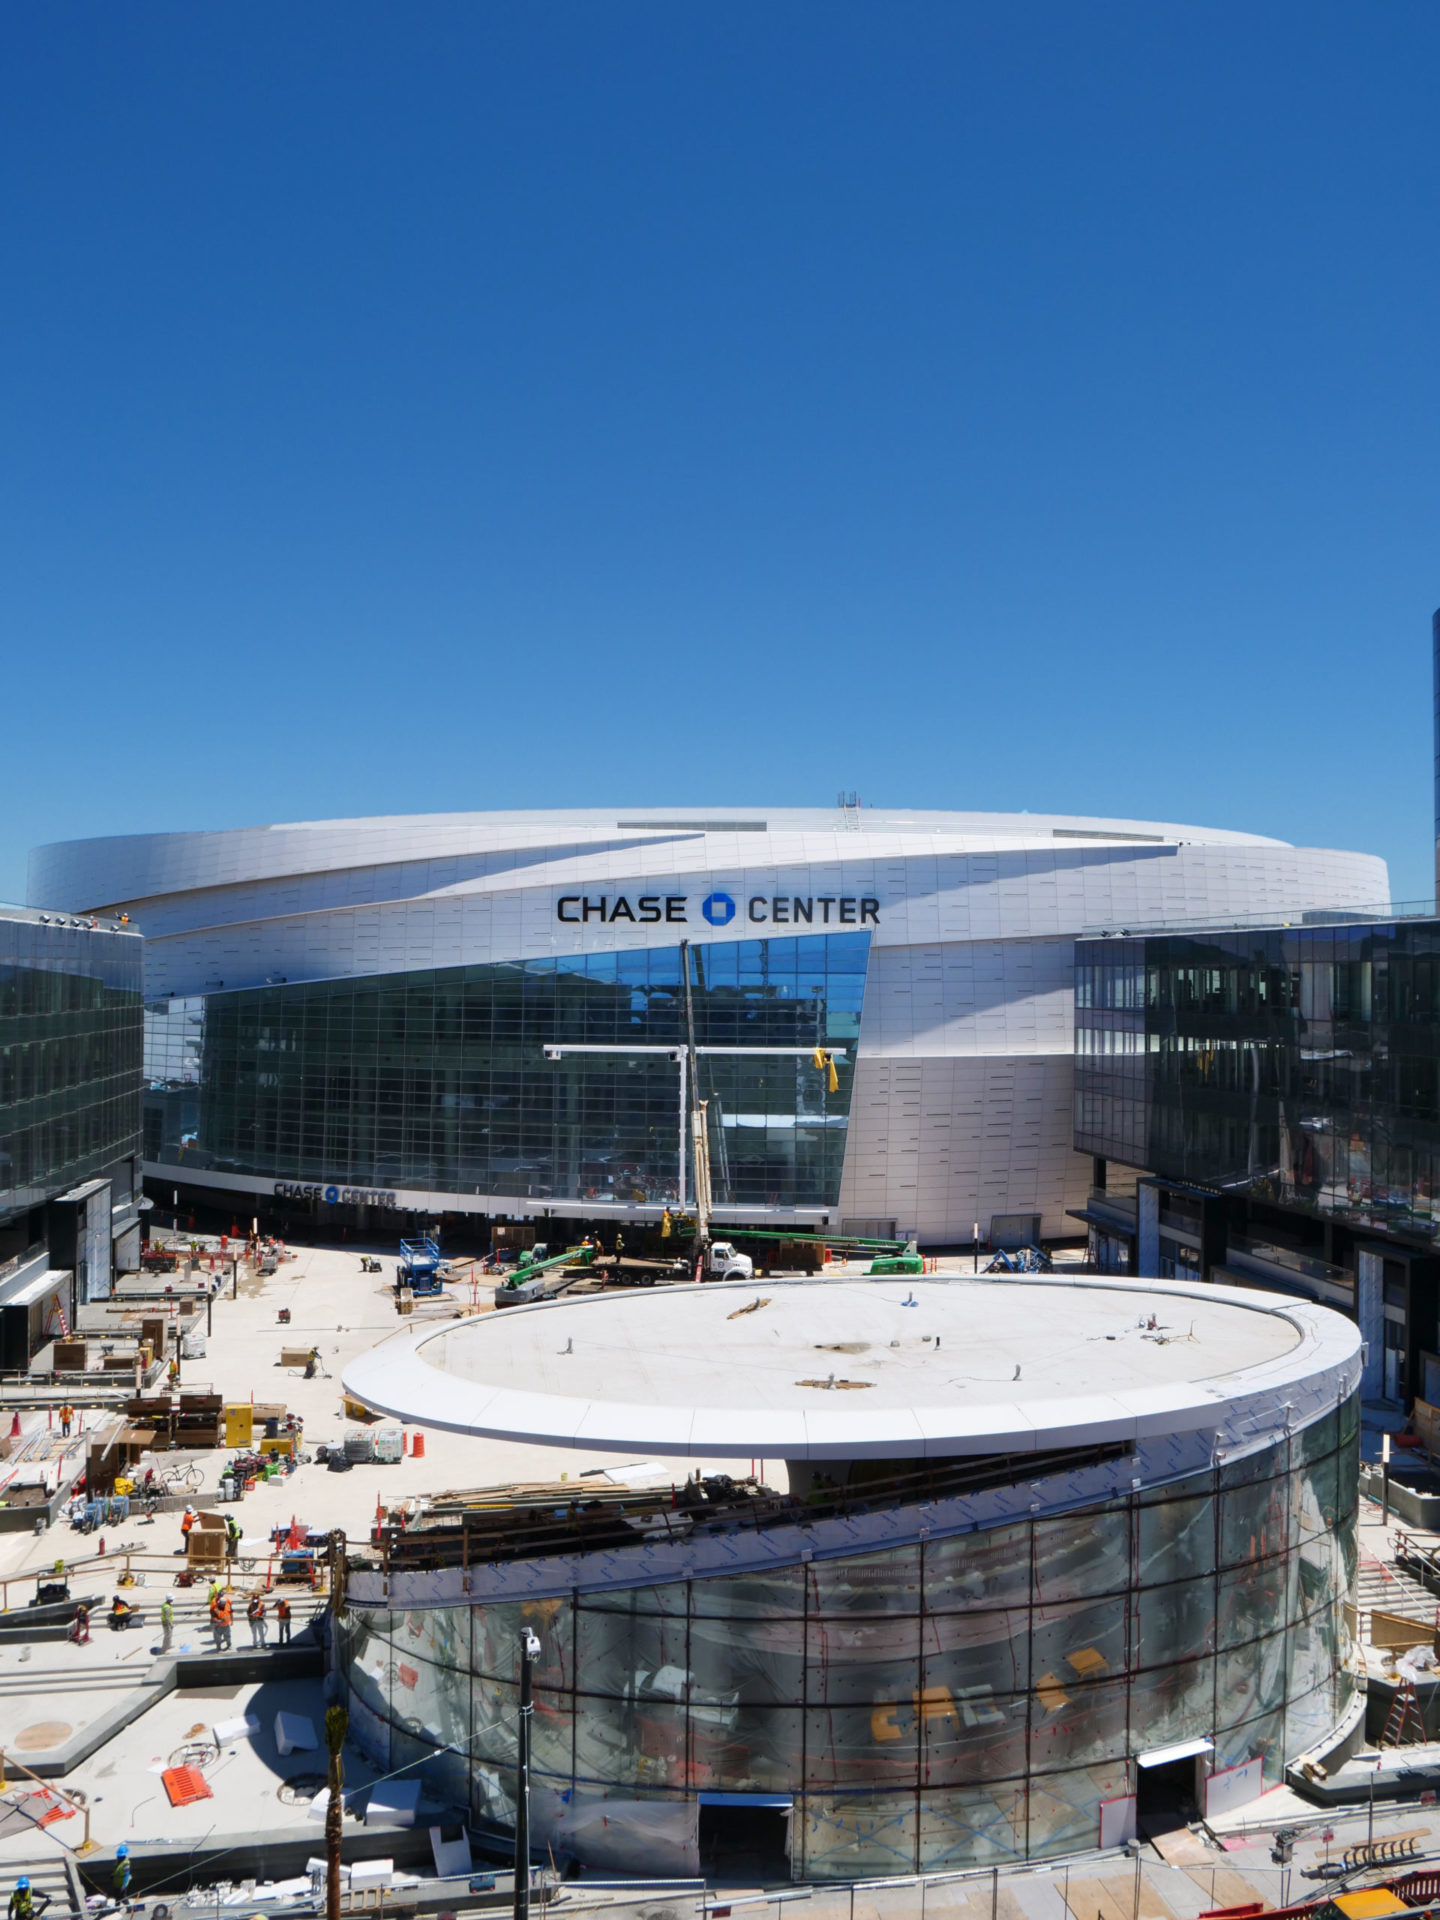 Image from the Gallery: Chase Center – San Francisco, CA